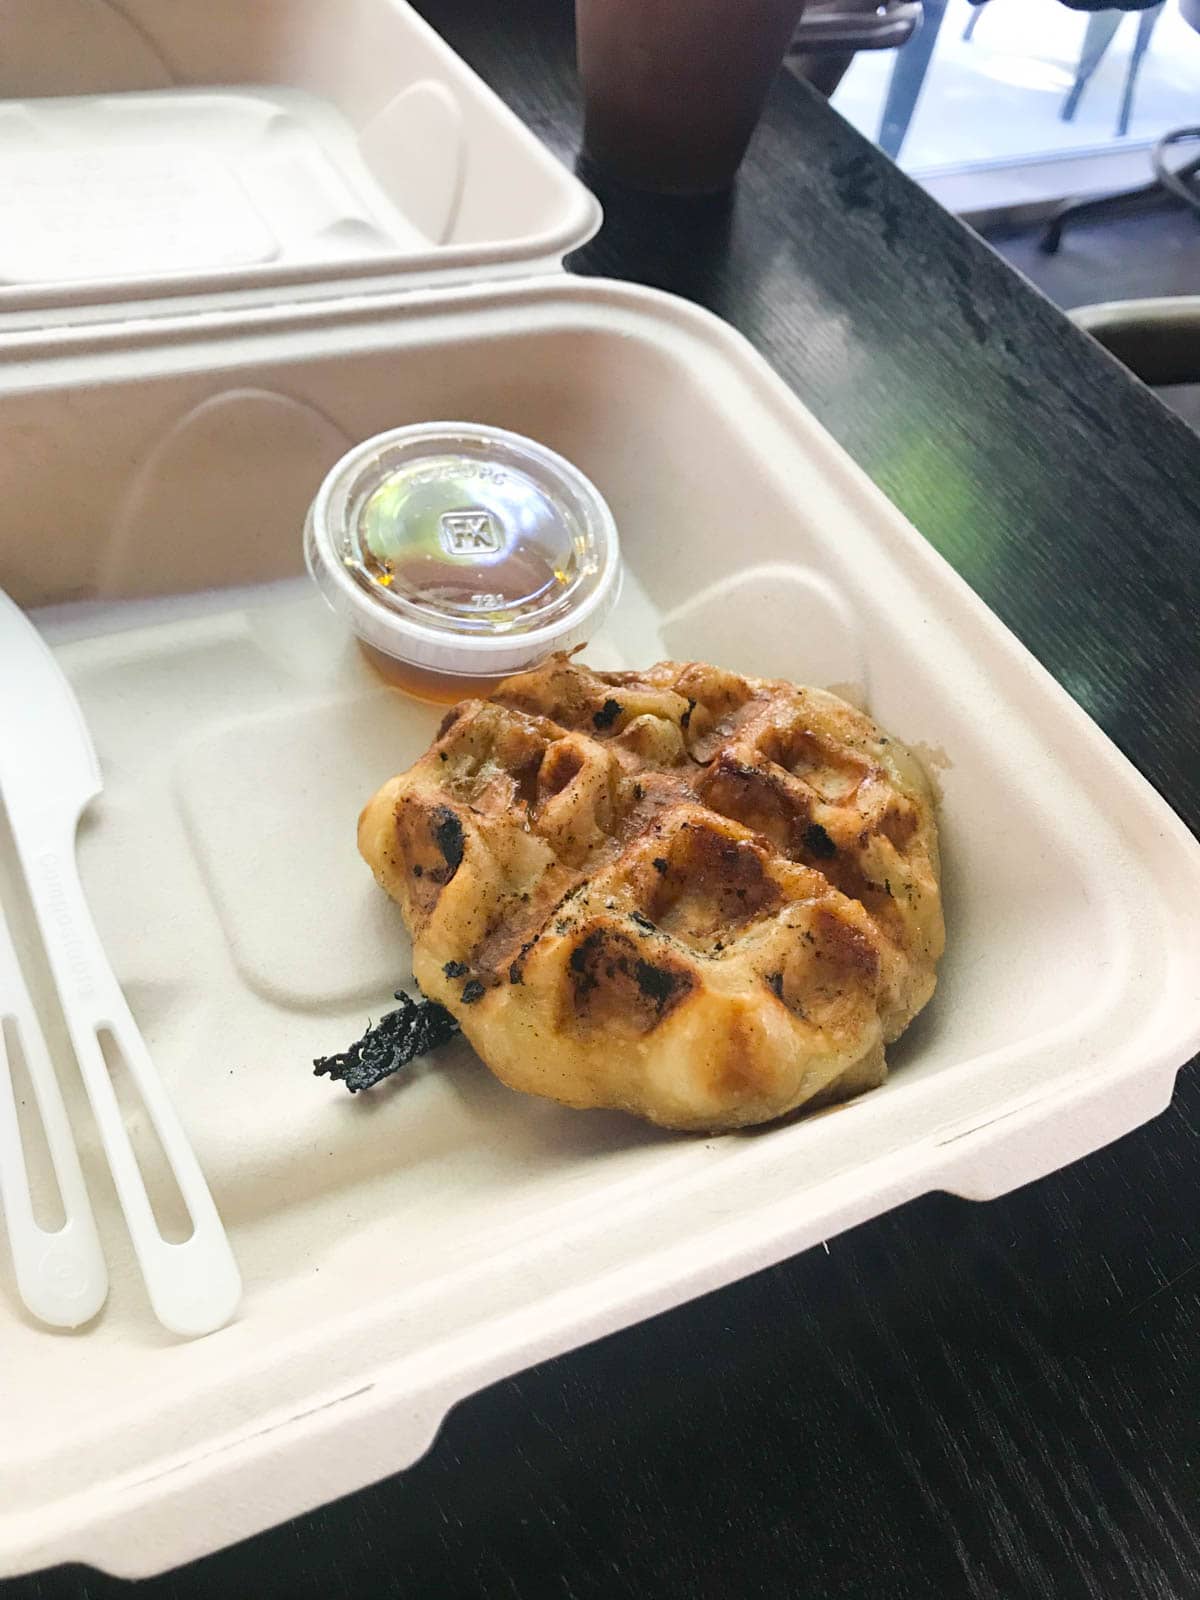 A small waffle in a white styrofoam box with some sweet syrup in a small cup next to it.